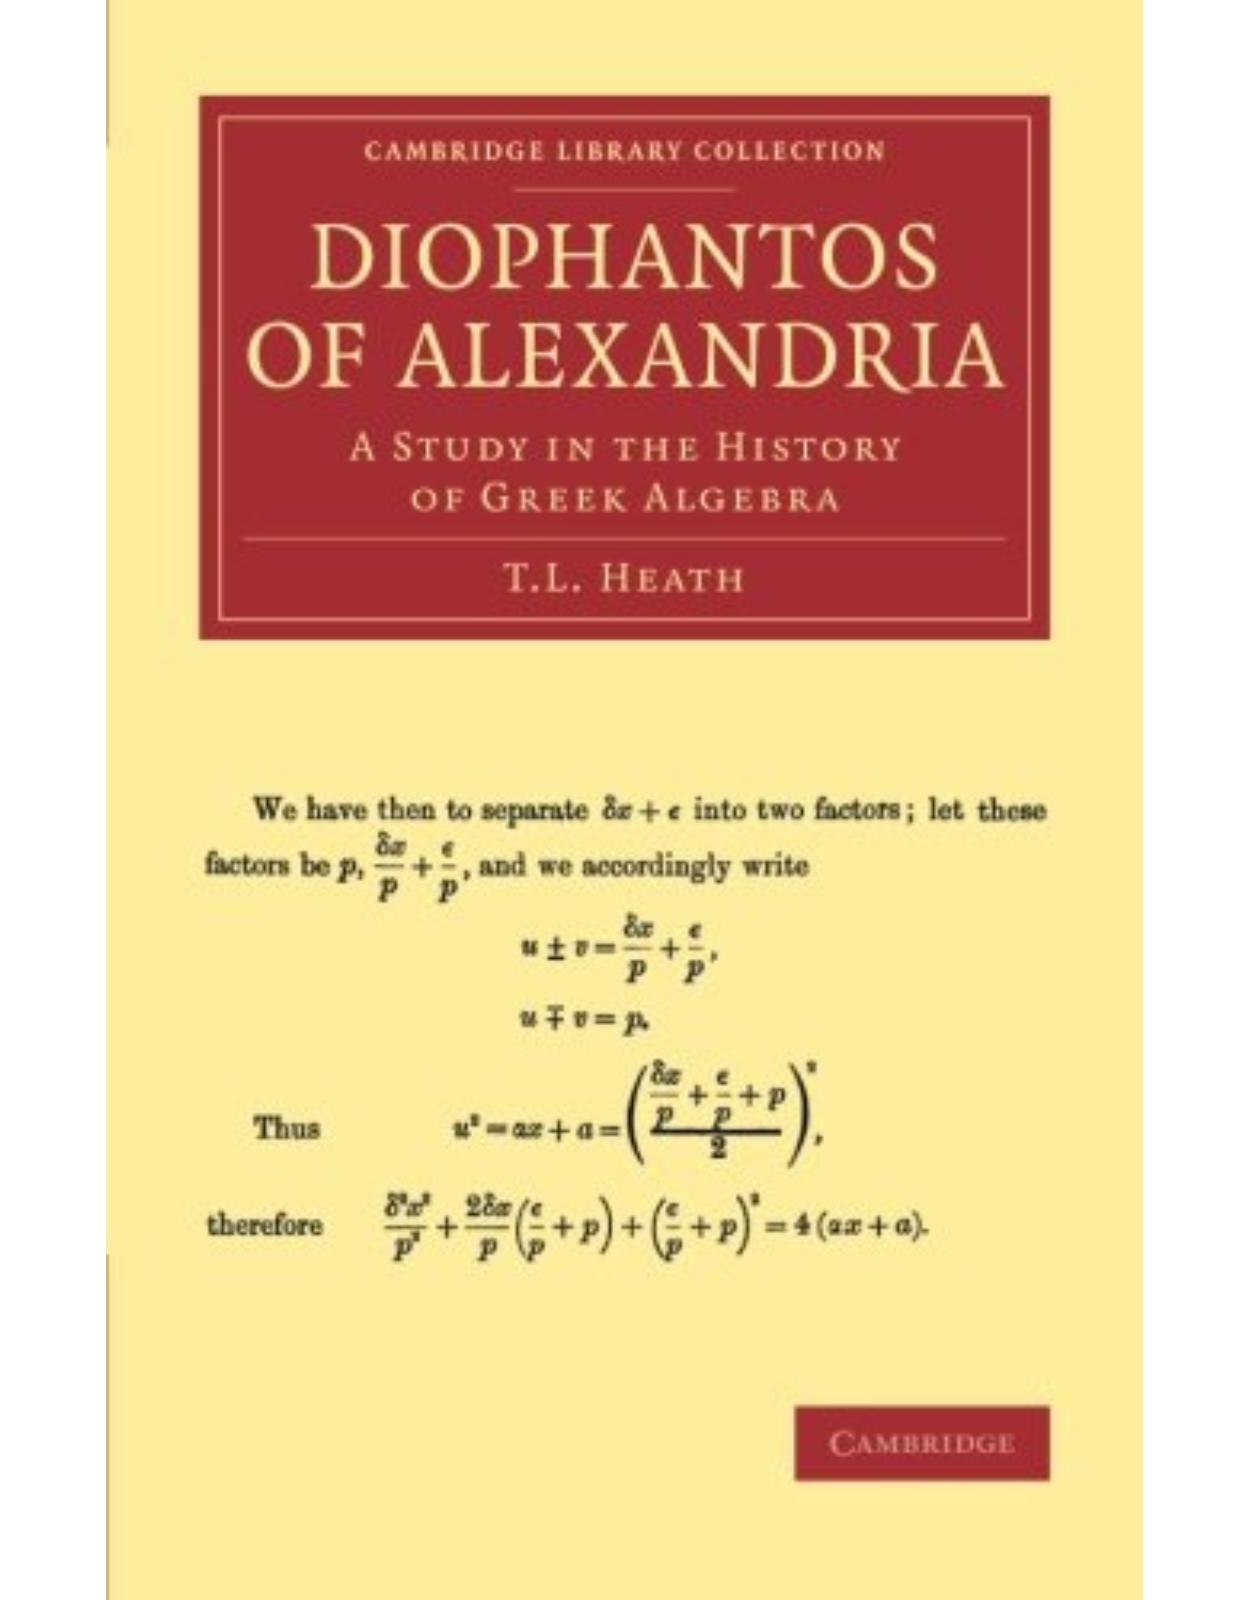 Diophantos of Alexandria: A Study in the History of Greek Algebra (Cambridge Library Collection - Classics)